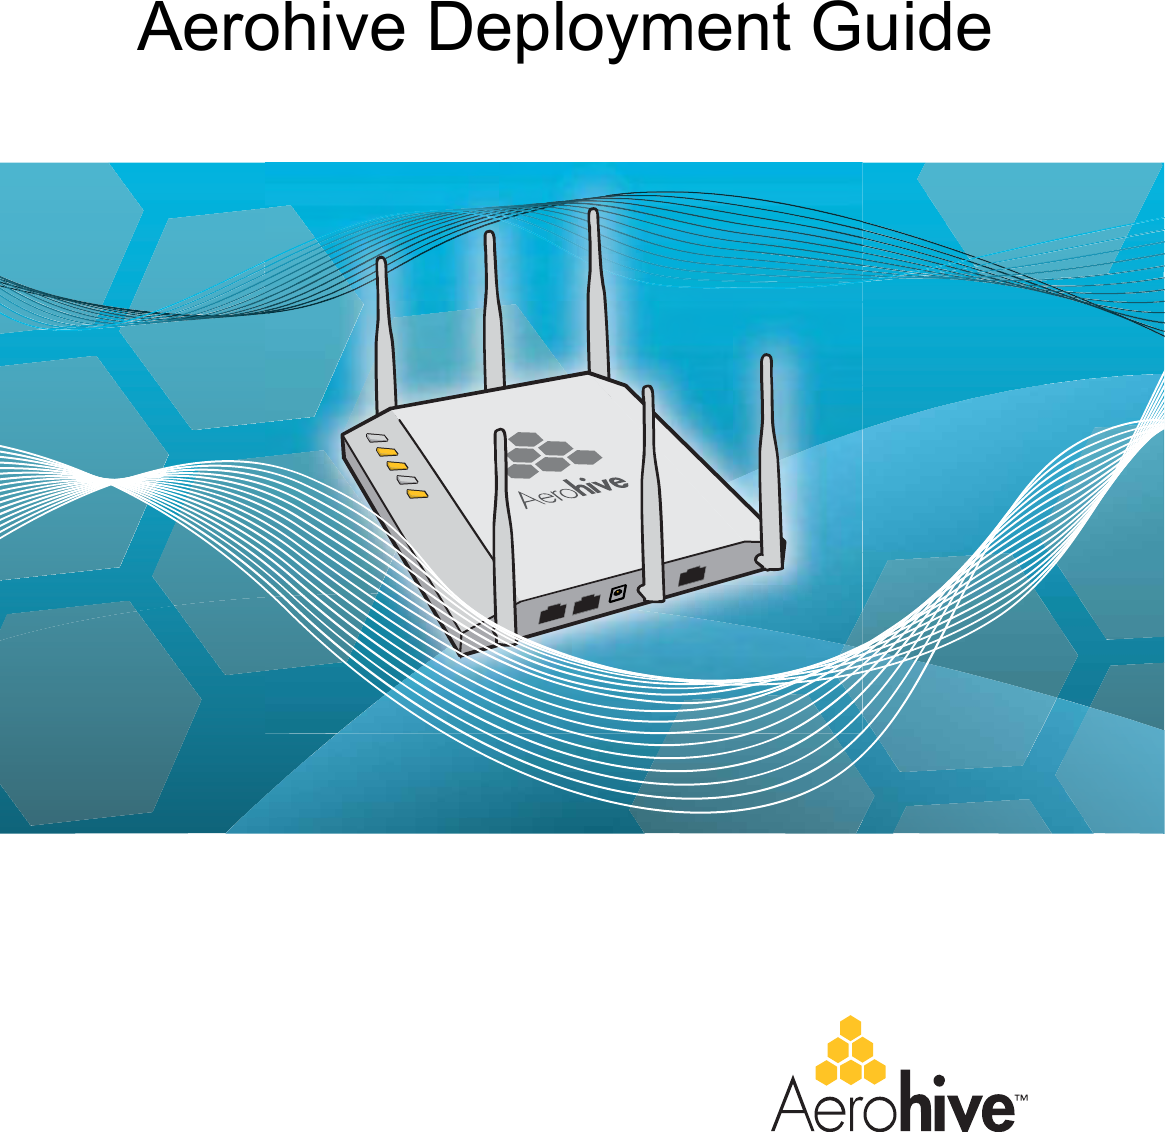 Aerohive Deployment Guide